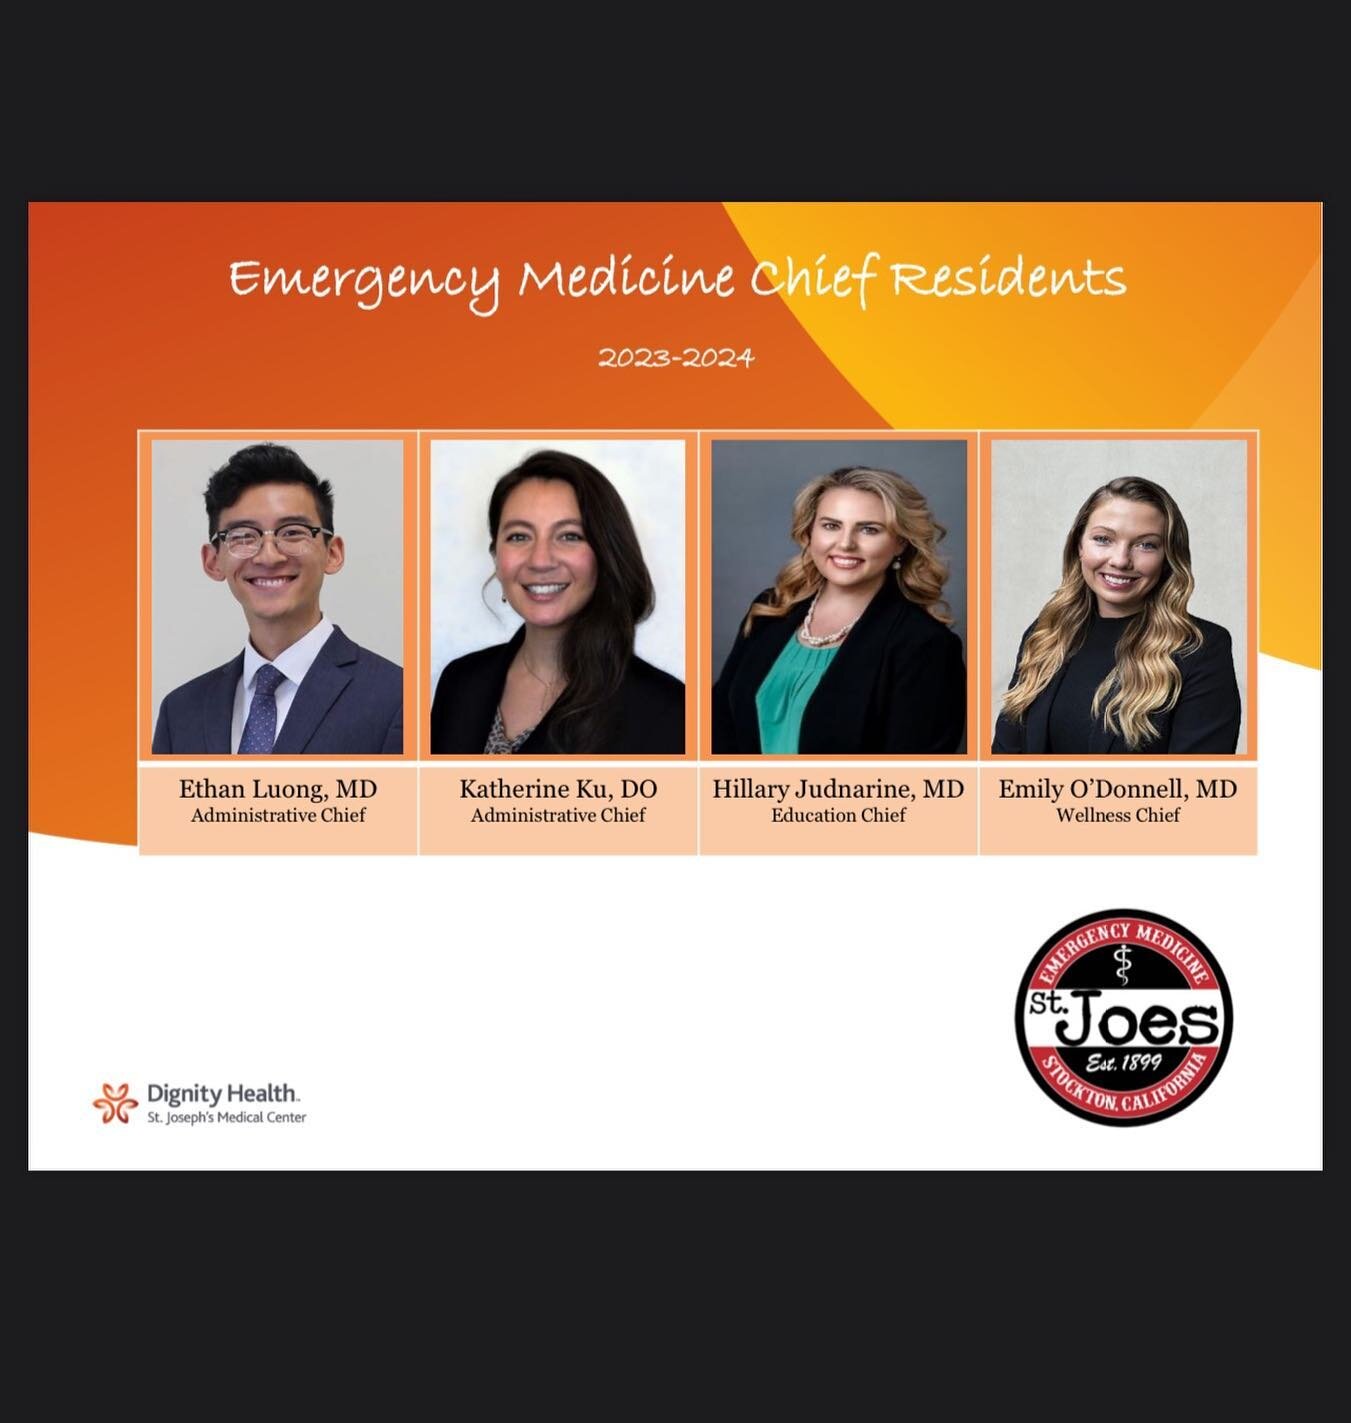 Big shout out and congratulations to our upcoming Chief Residents for 2025-2026 🎉👏🏼 Well deserved and can&rsquo;t wait to see what the next year holds for our program! #emergencymedicineresidency #chiefresident #emdocs